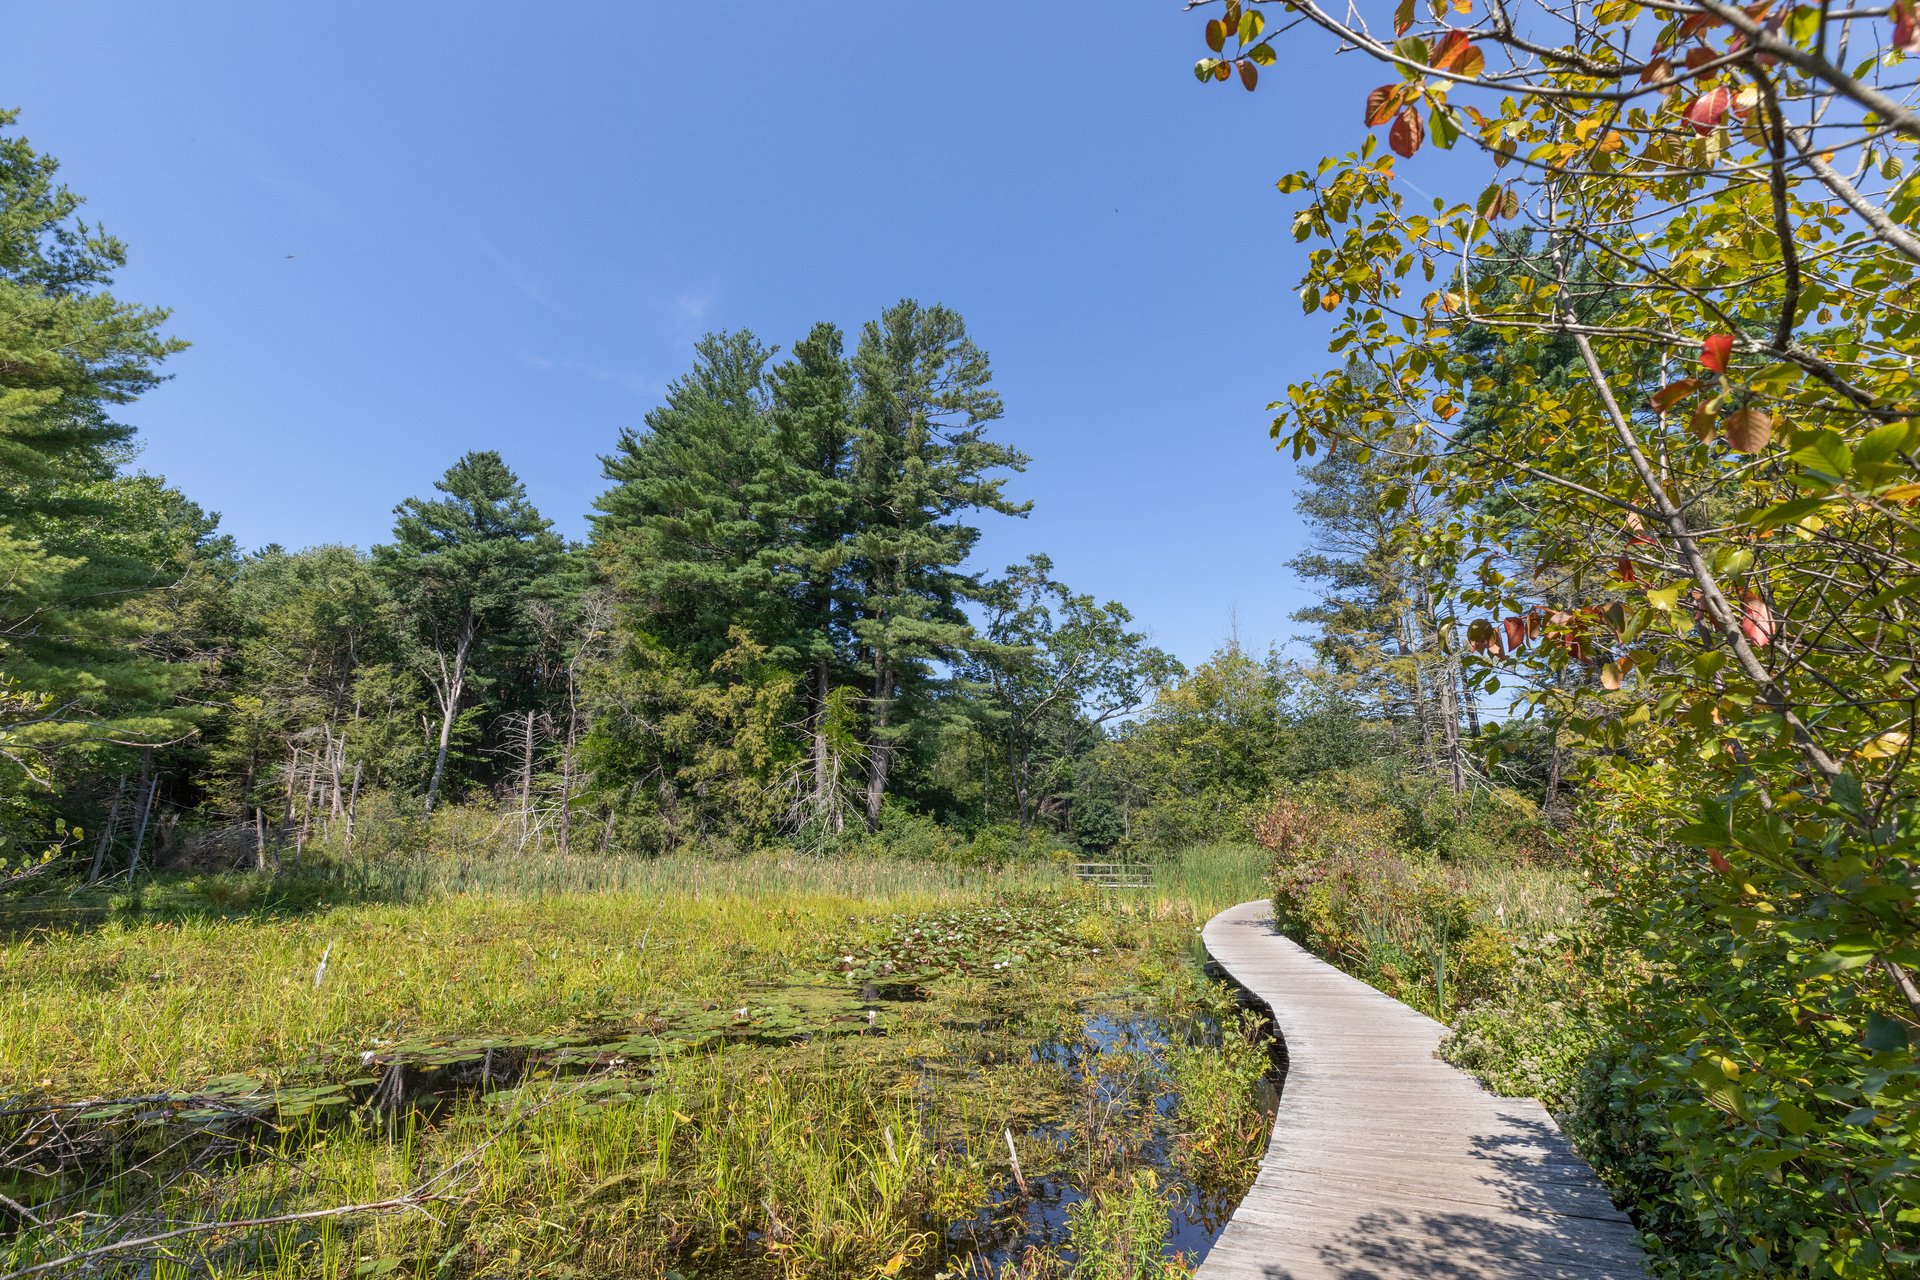 A winding wooden boardwalk on the edge of a marshy pond. Pine trees off to the left side of the water.